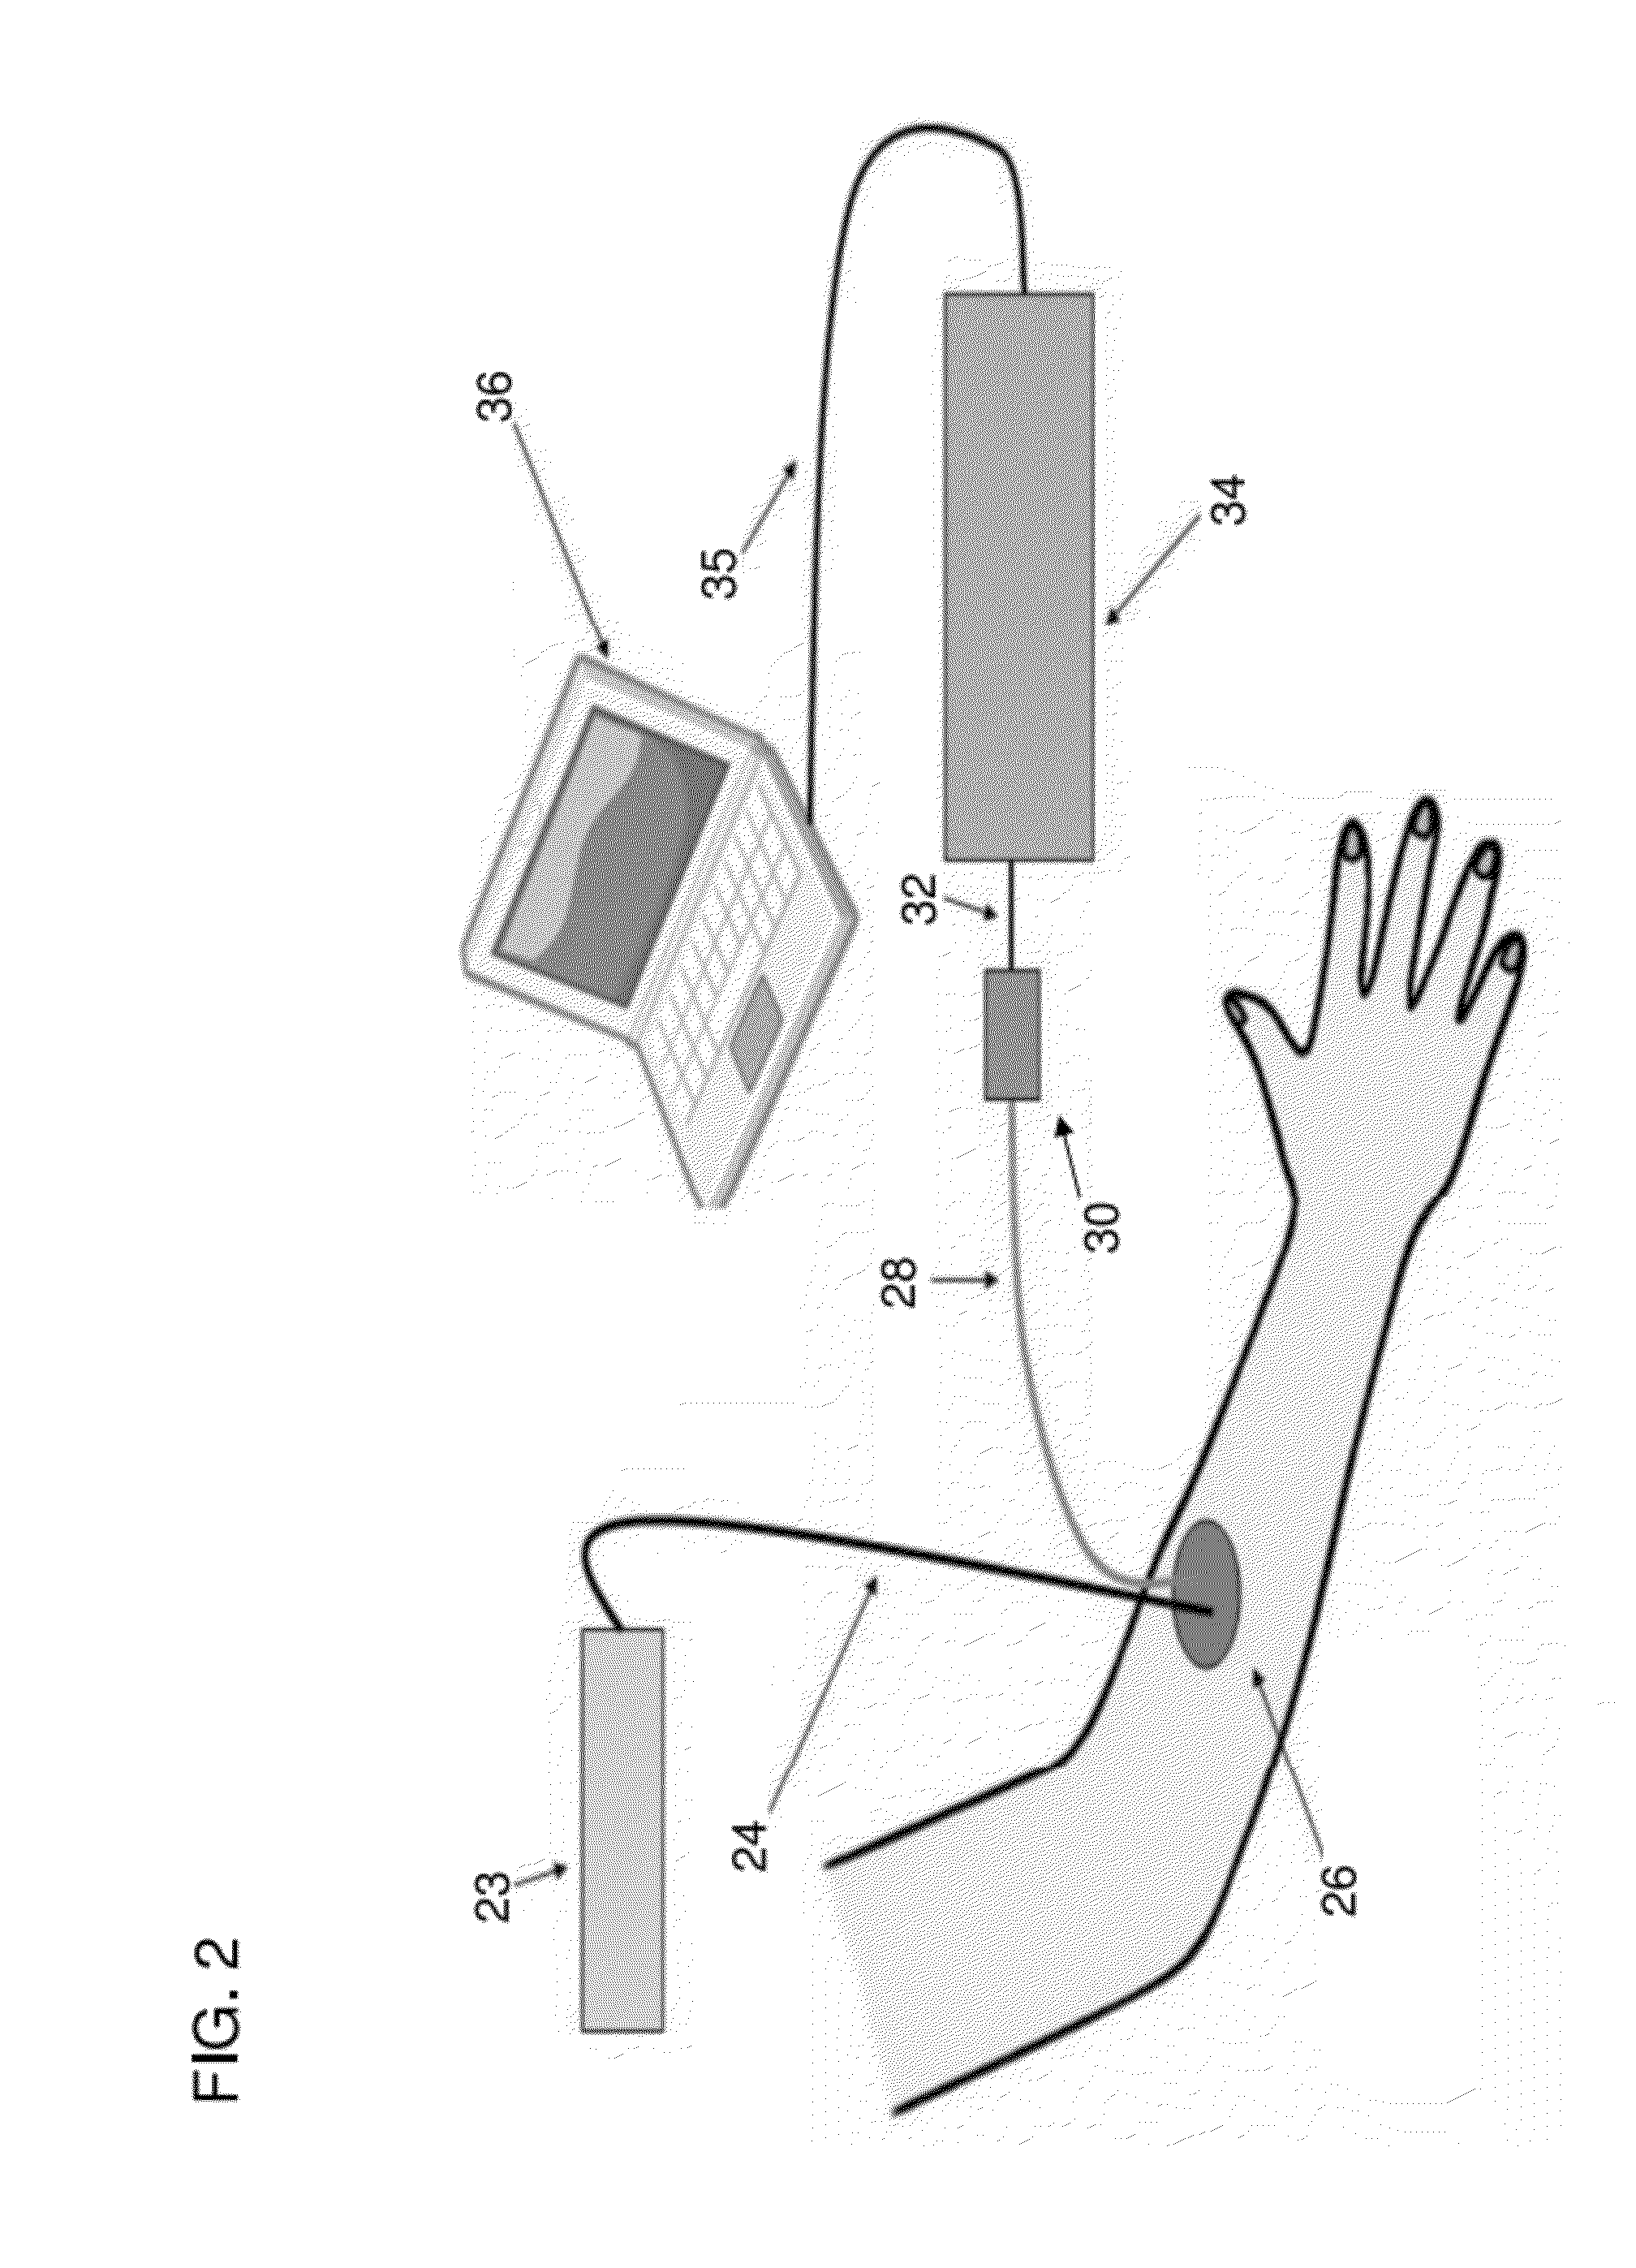 Systems, devices and methods for monitoring hemodynamics